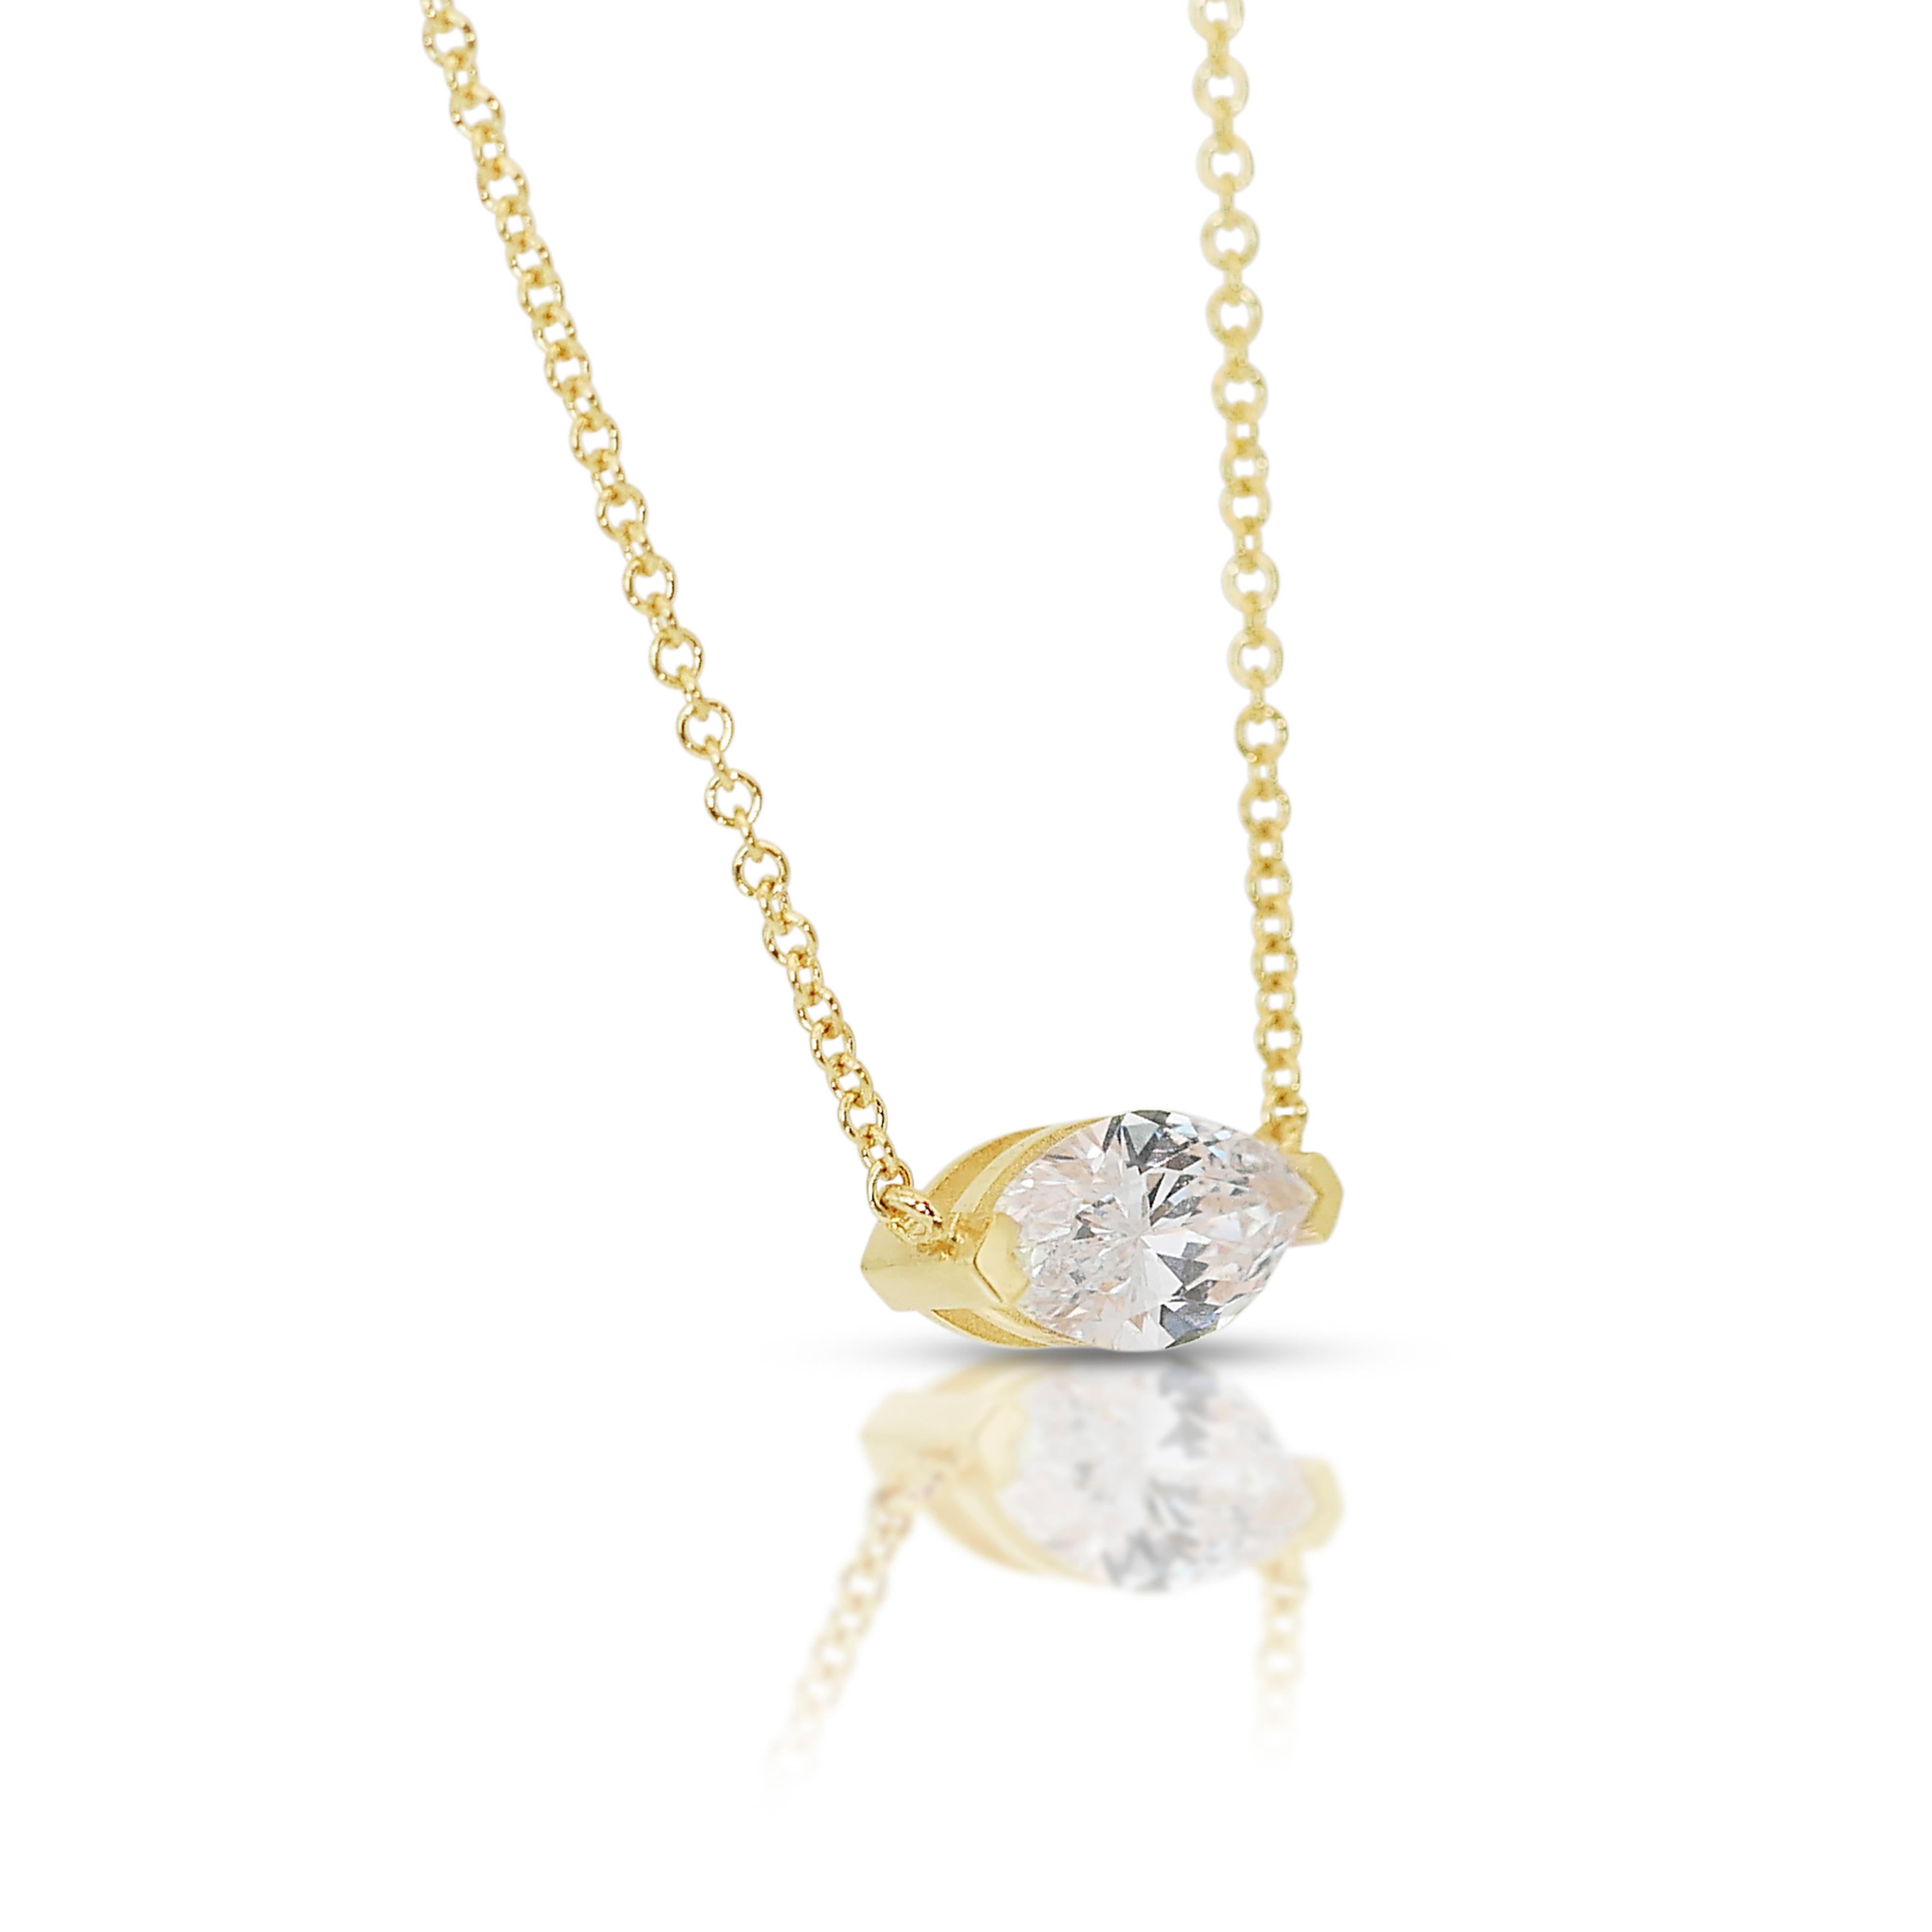 Elegant 1.01ct Diamond Solitaire Necklace in 18k Yellow Gold - GIA Certified In New Condition For Sale In רמת גן, IL